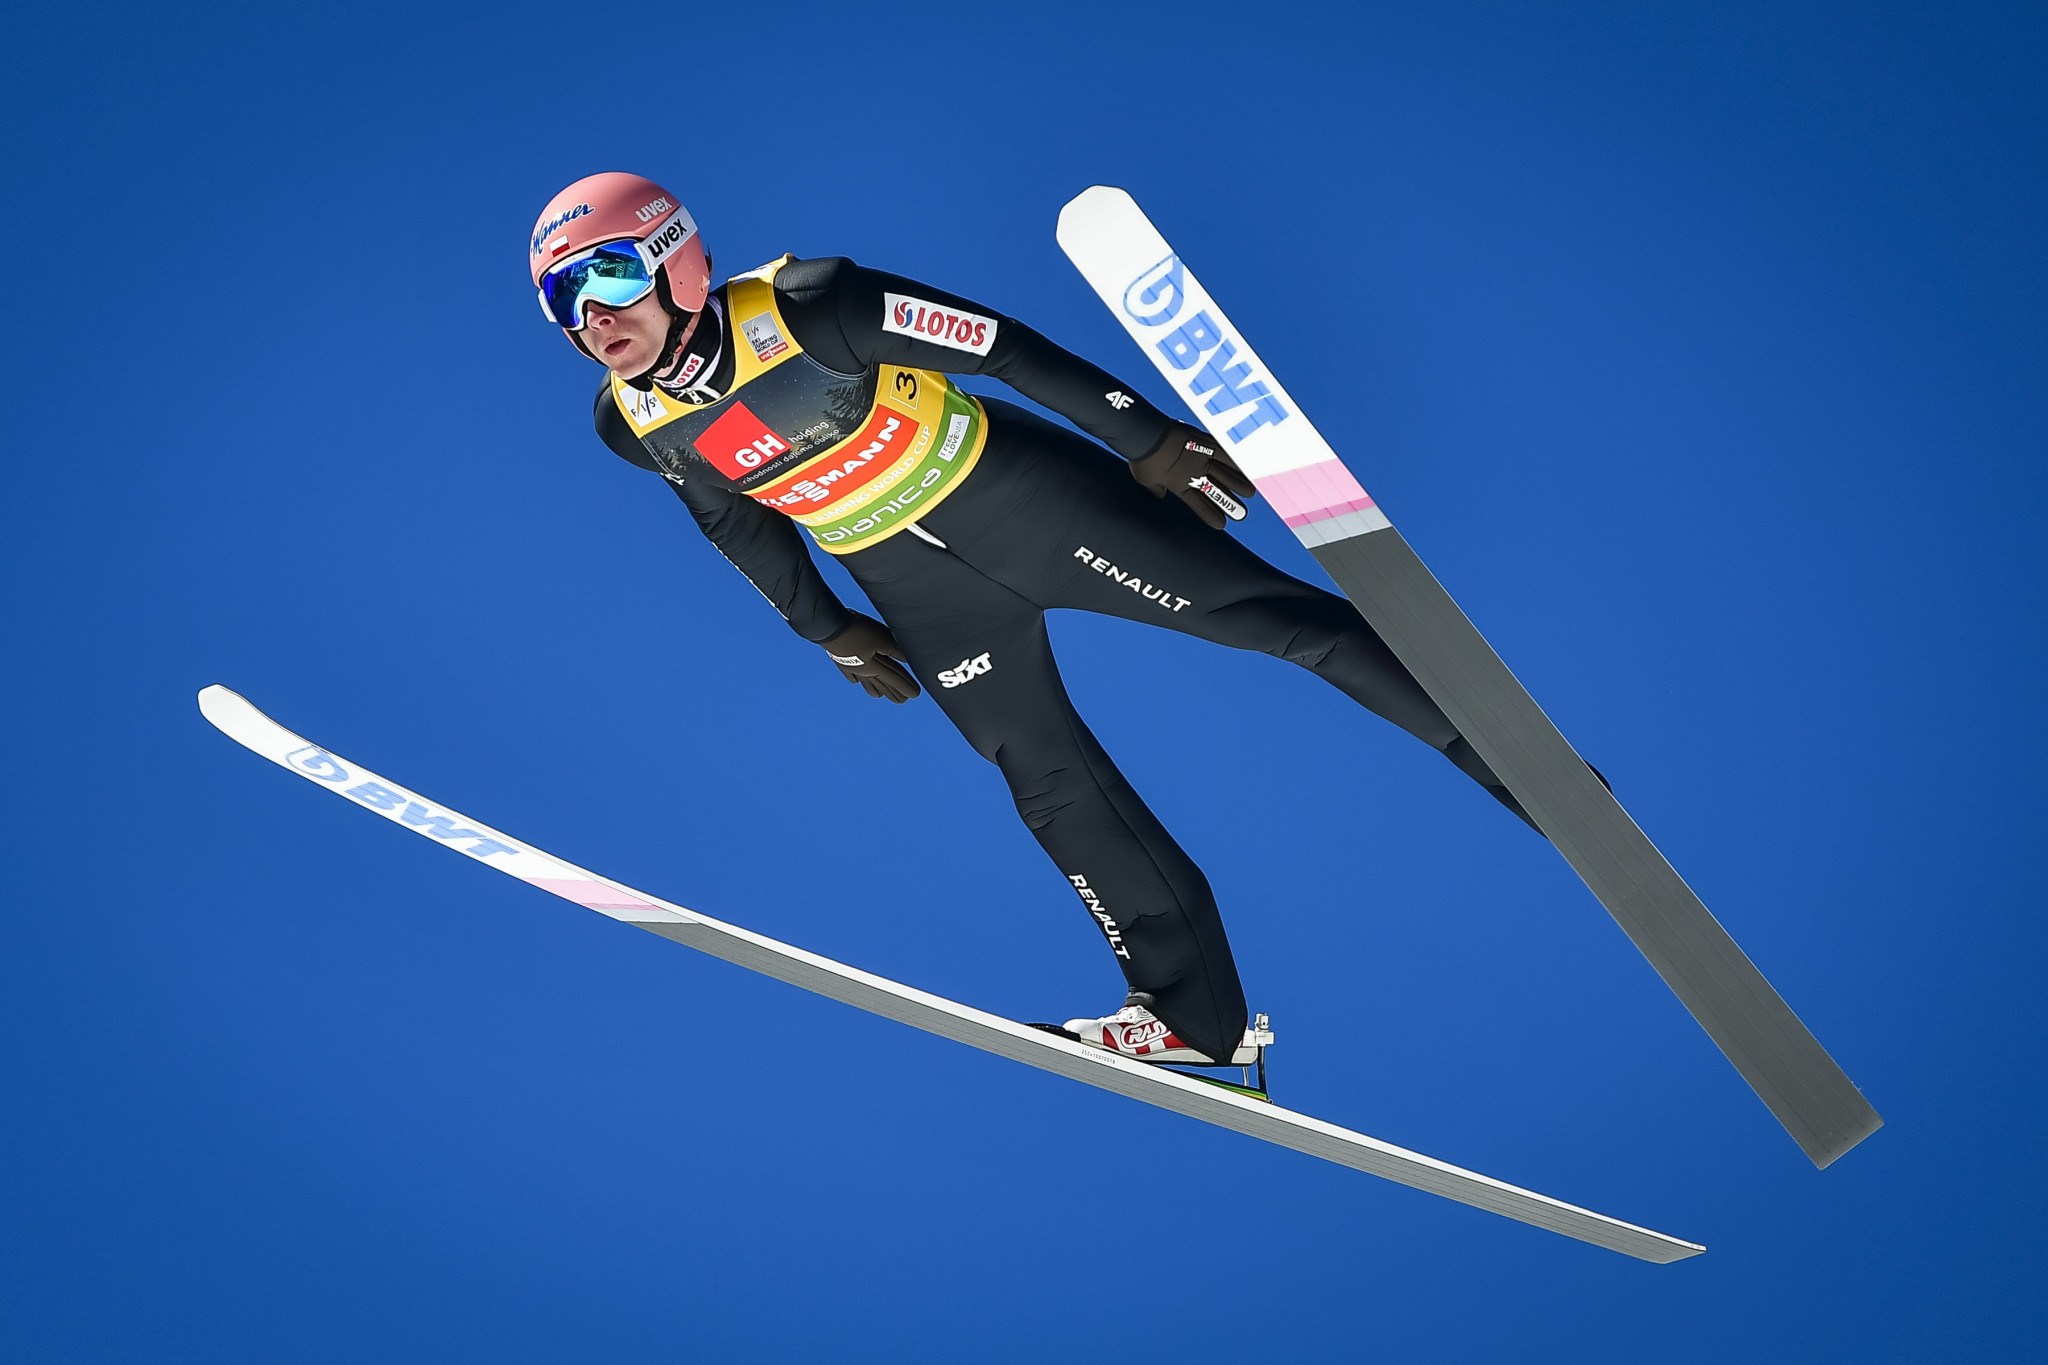 poland-win-team-competition-at-fis-ski-jumping-world-cup